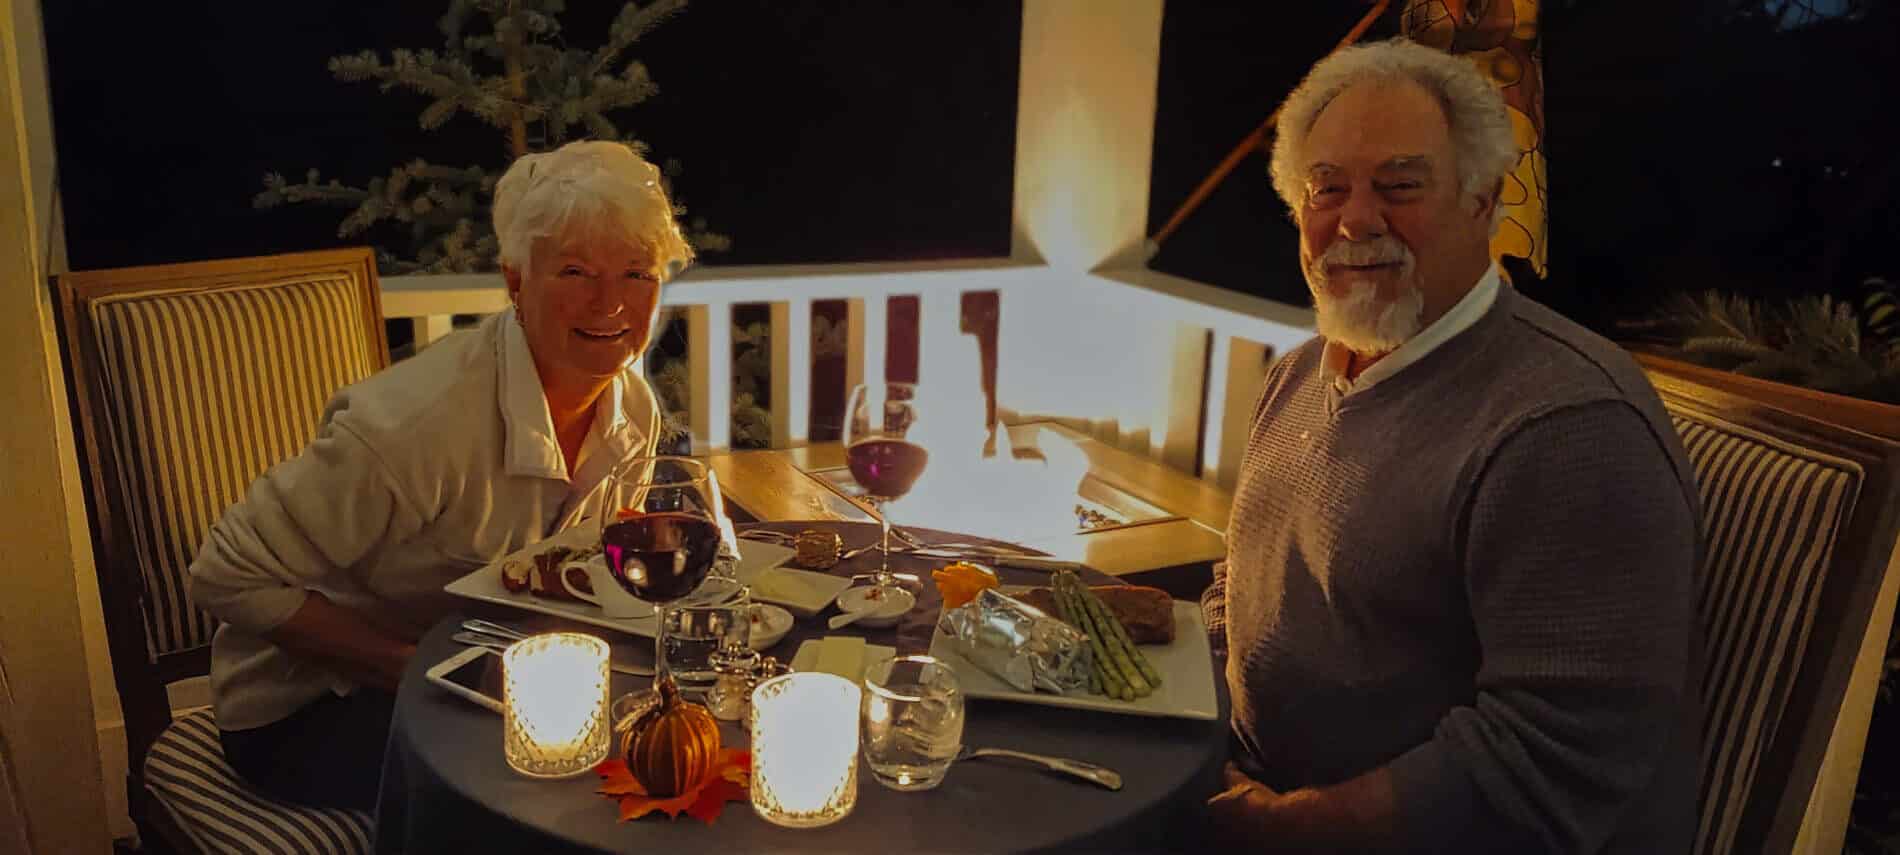 older couple sitting on balcony for dinner by candlelight with red wine glasses and fire pit burning in corner